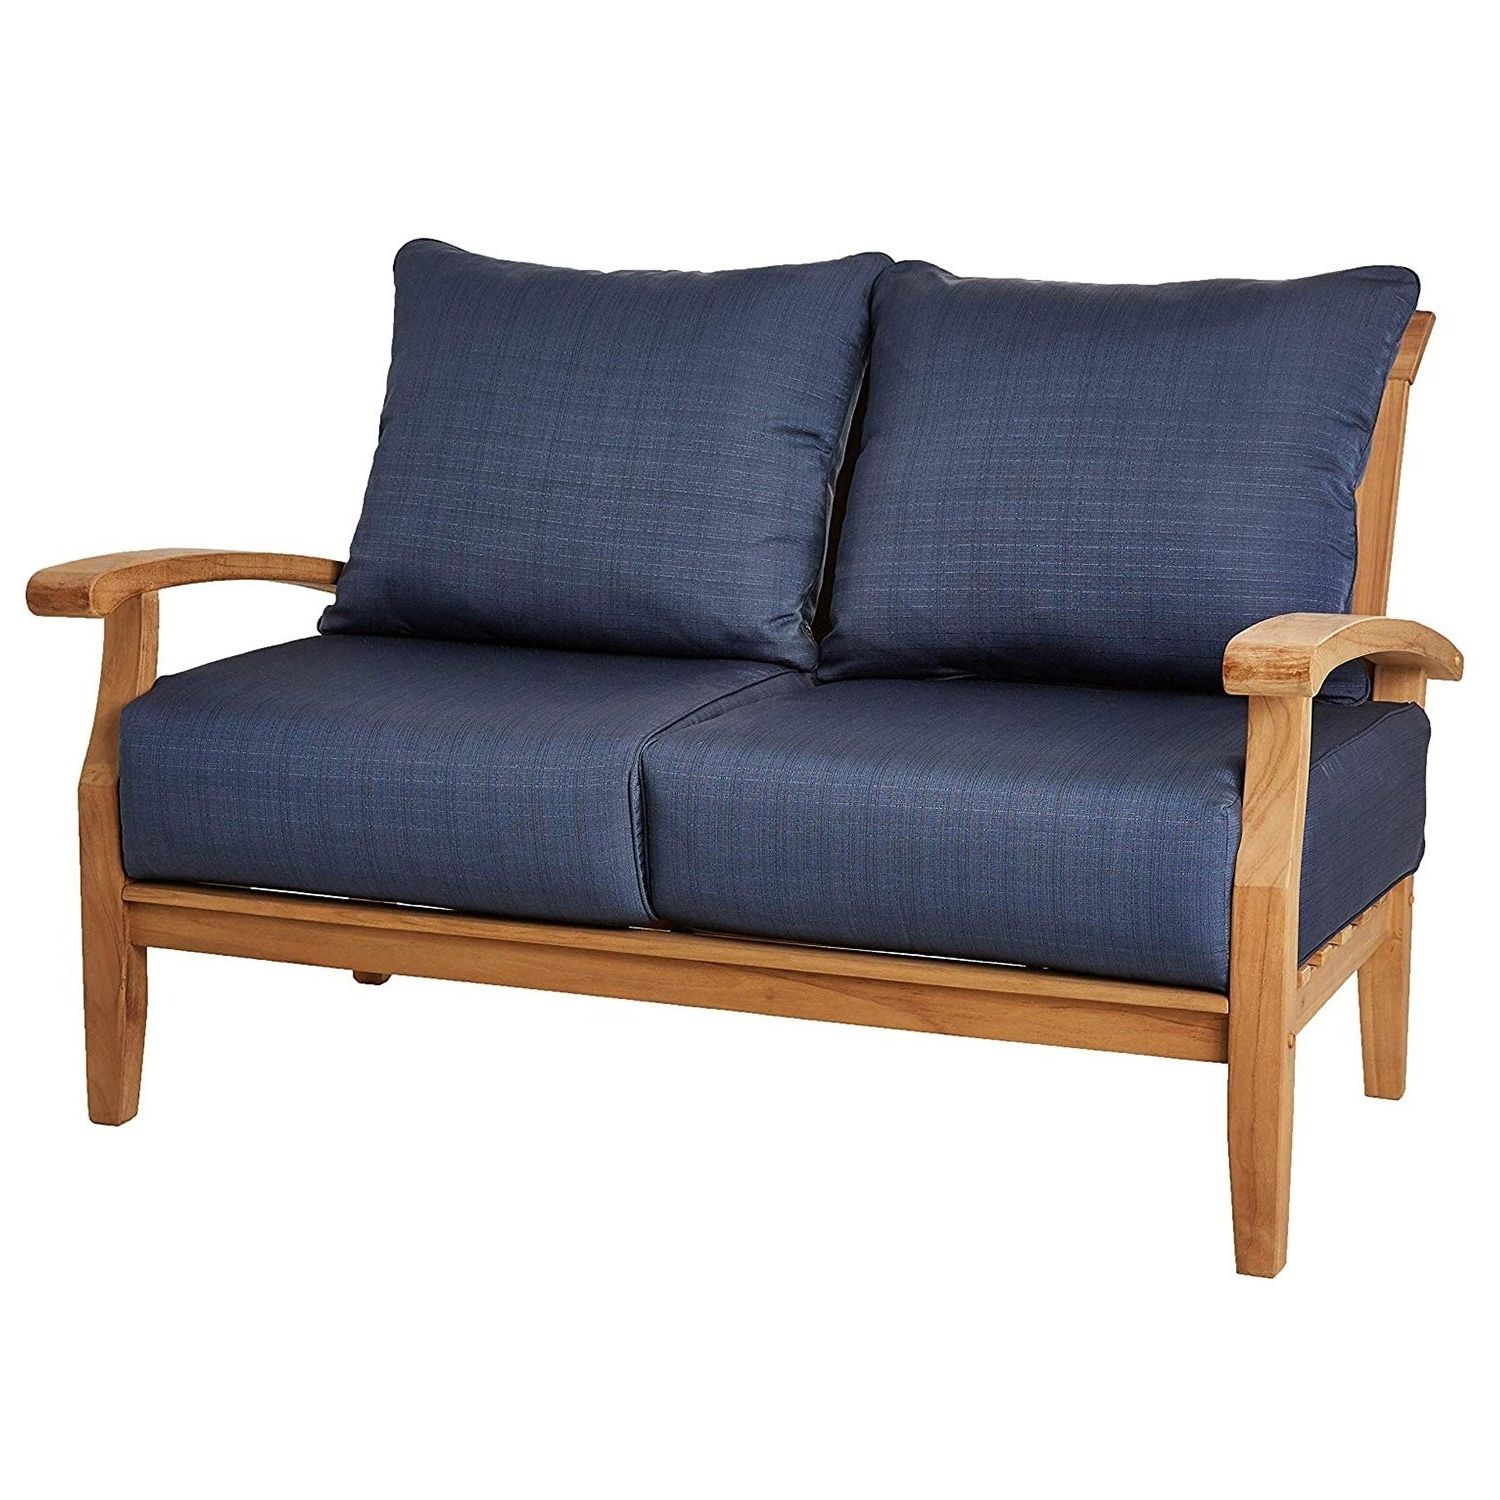 Havenside Home Leon Teak Patio Loveseat With Cushion Inside Popular Montford Teak Loveseats With Cushions (View 20 of 20)